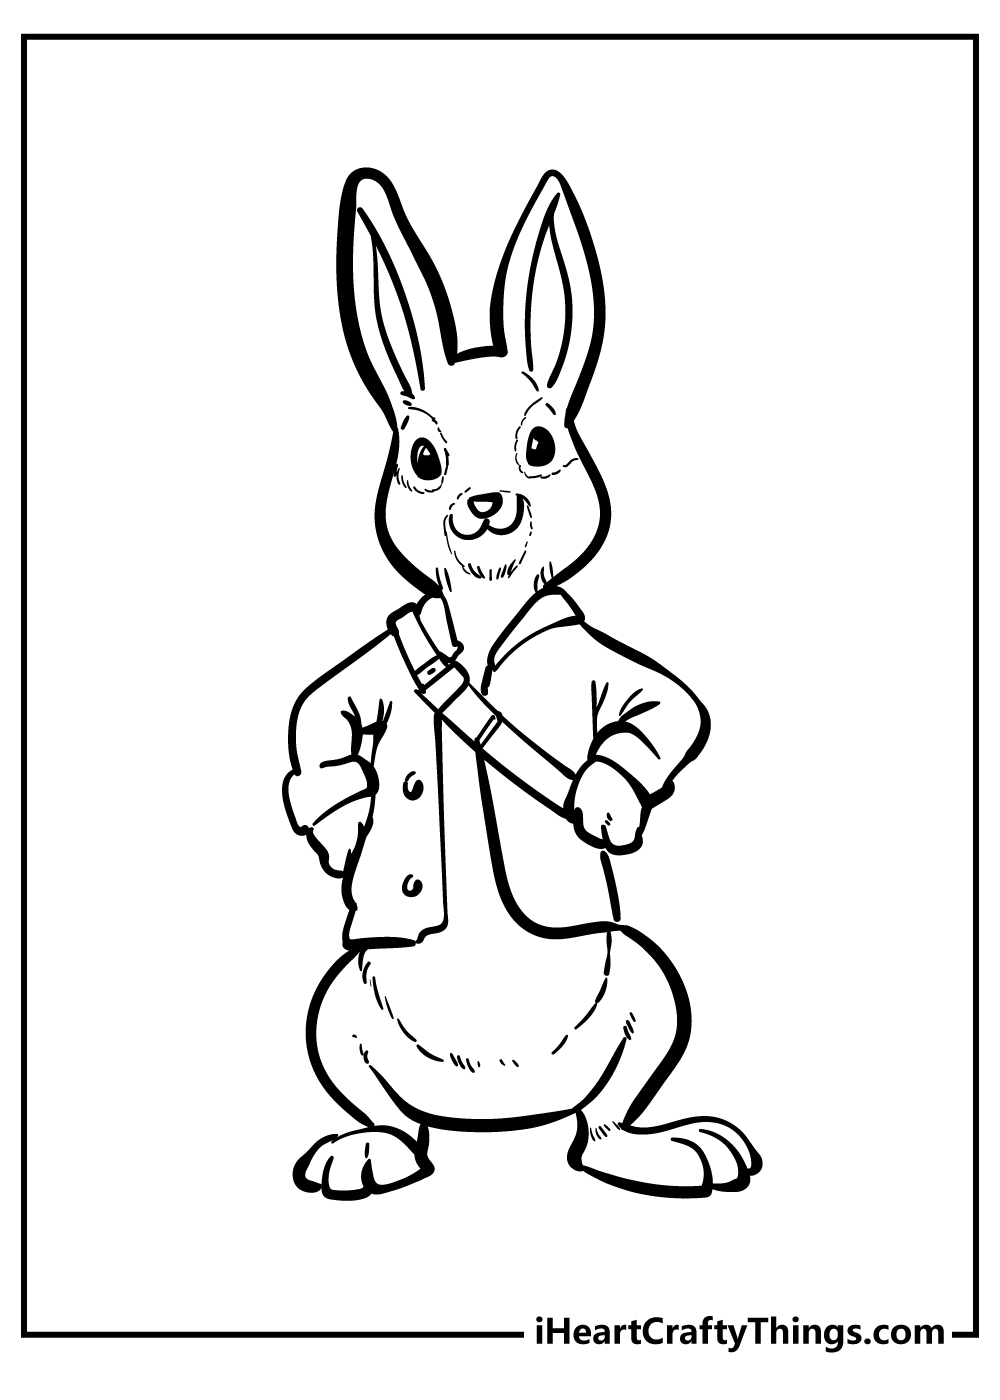 Peter Rabbit Coloring Pages for kids free download